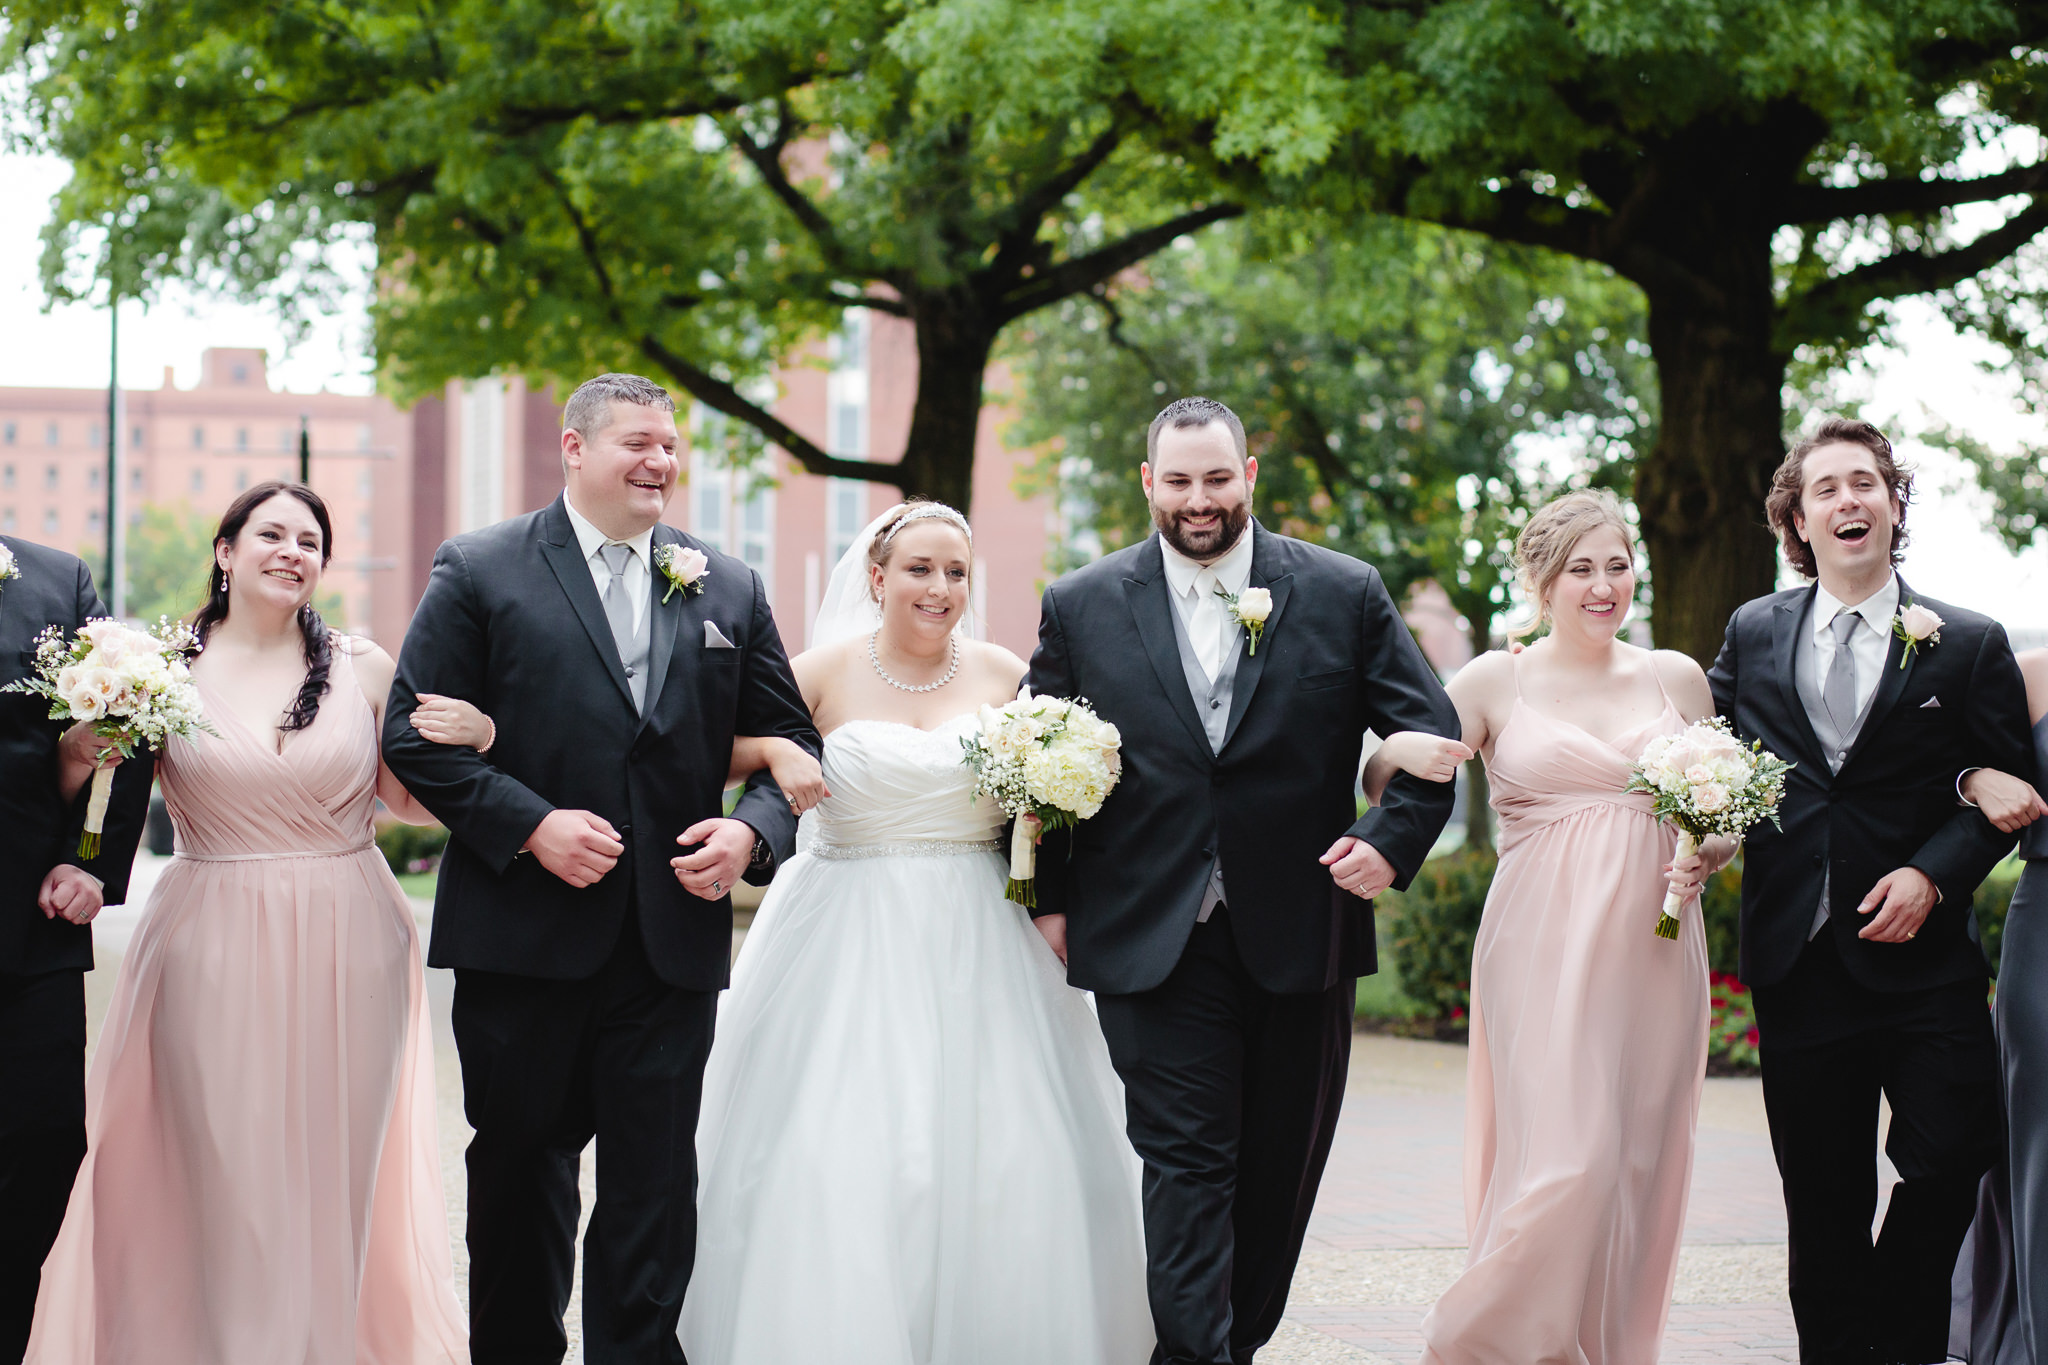 Bride & groom walk and laugh with their bridal party on Academic Walk at Duquesne University